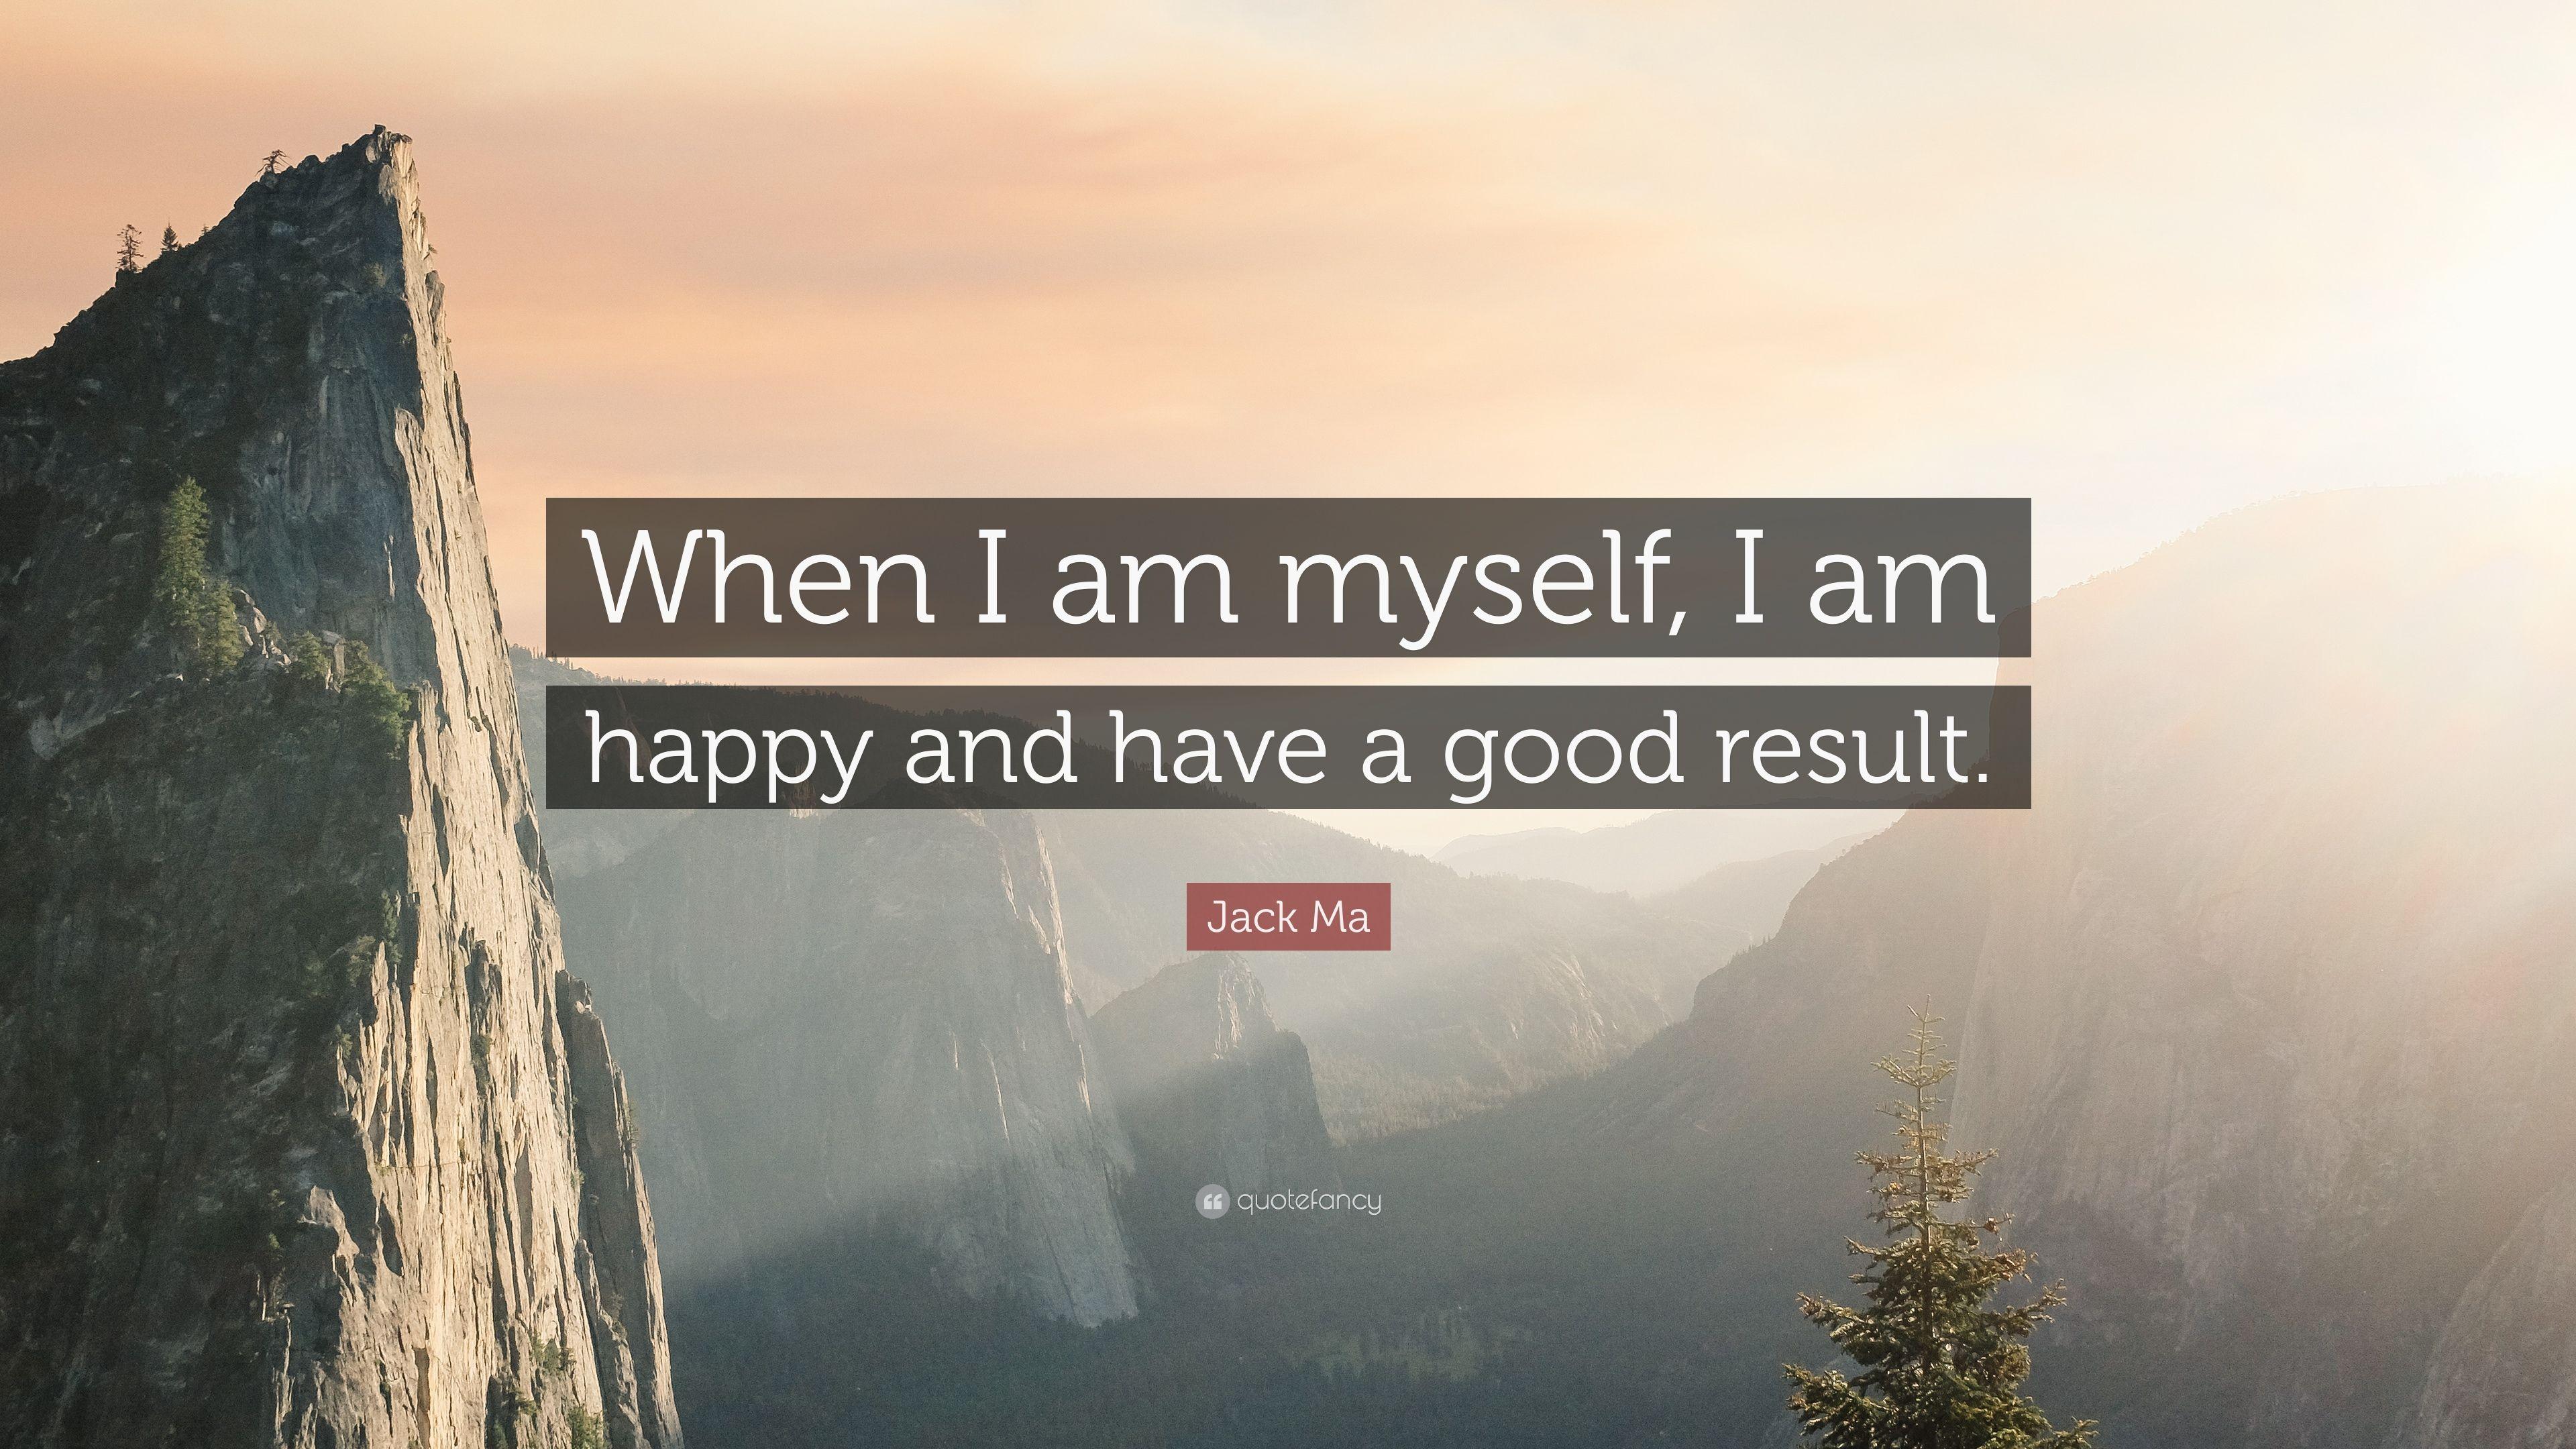 Jack Ma Quote: “When I am myself, I am happy and have a good